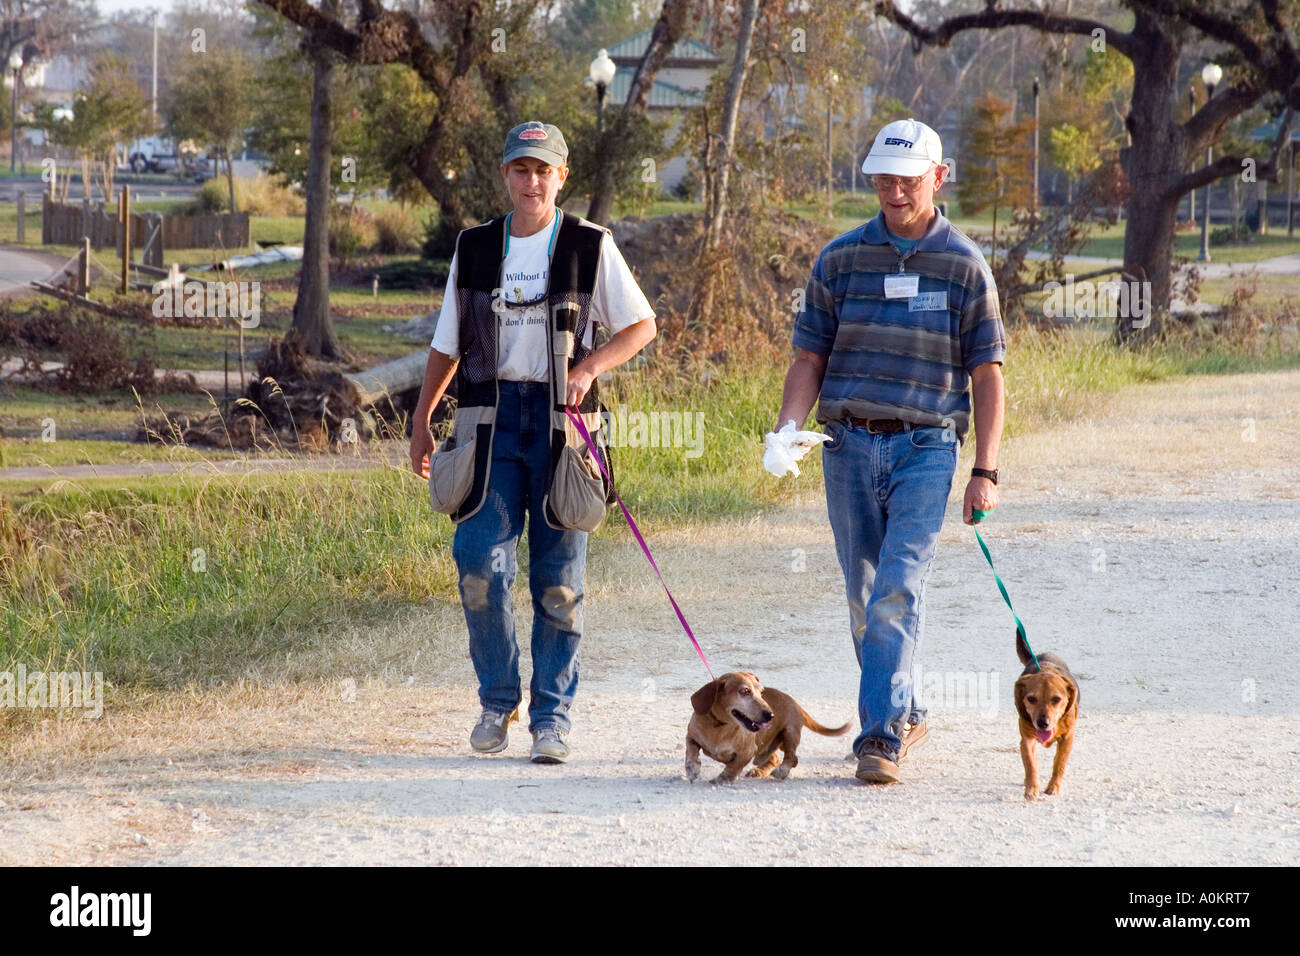 Volunteers walk dogs at an animal shelter run by Noah s Wish in Slidell Louisiana during the aftermath of Hurricane Katrina Stock Photo